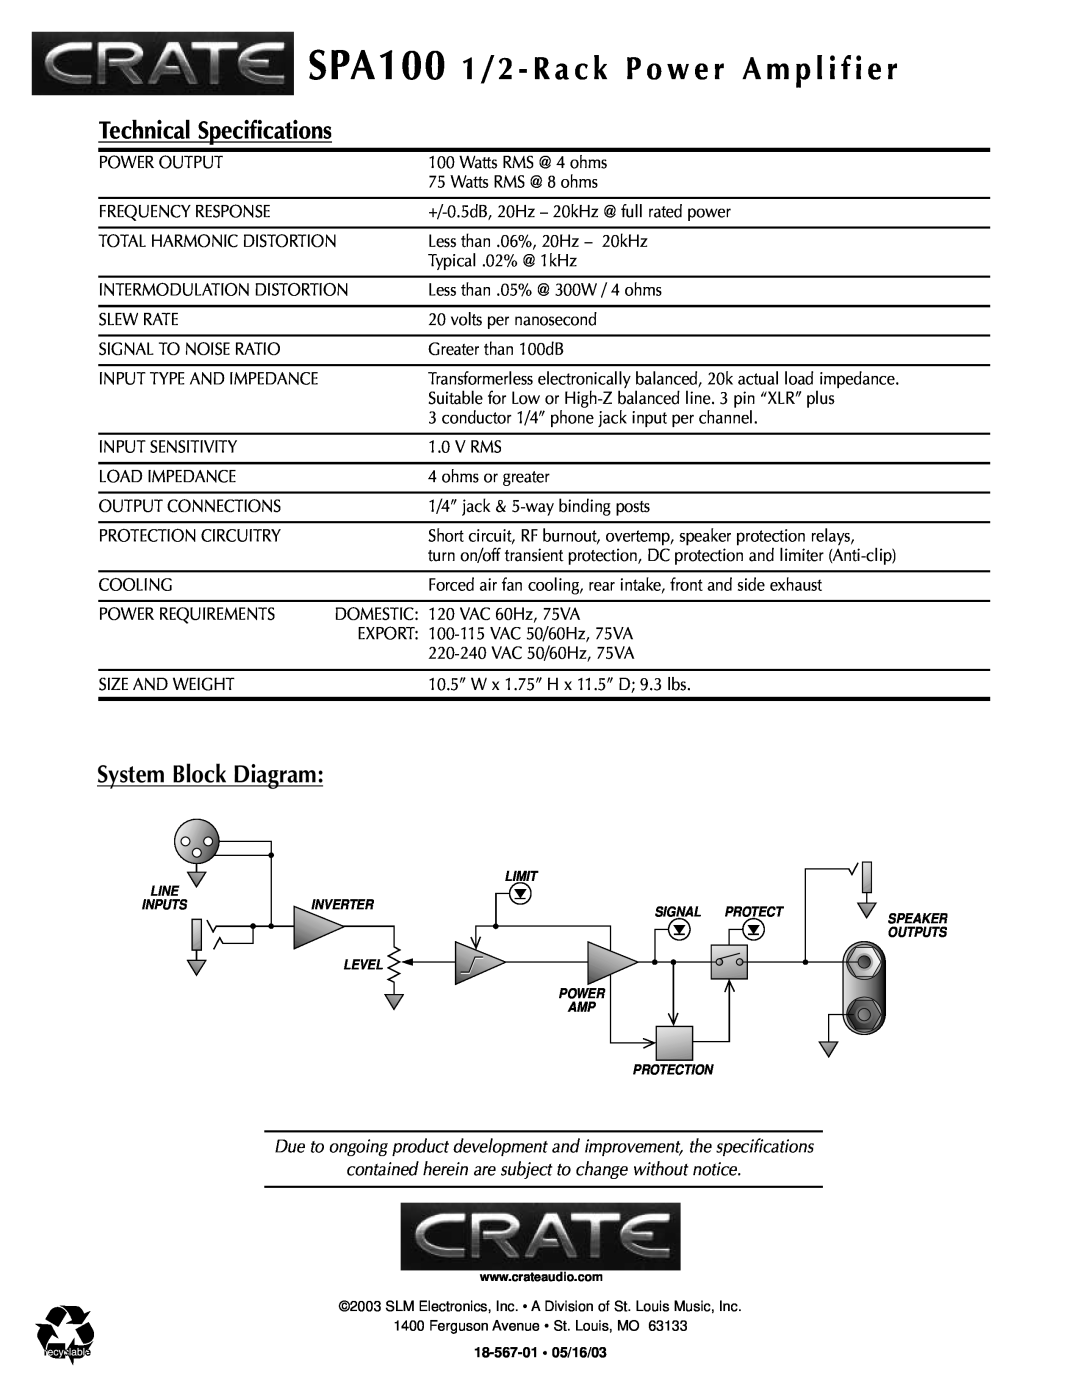 Crate Amplifiers SPA100 manual Technical Specifications, System Block Diagram 